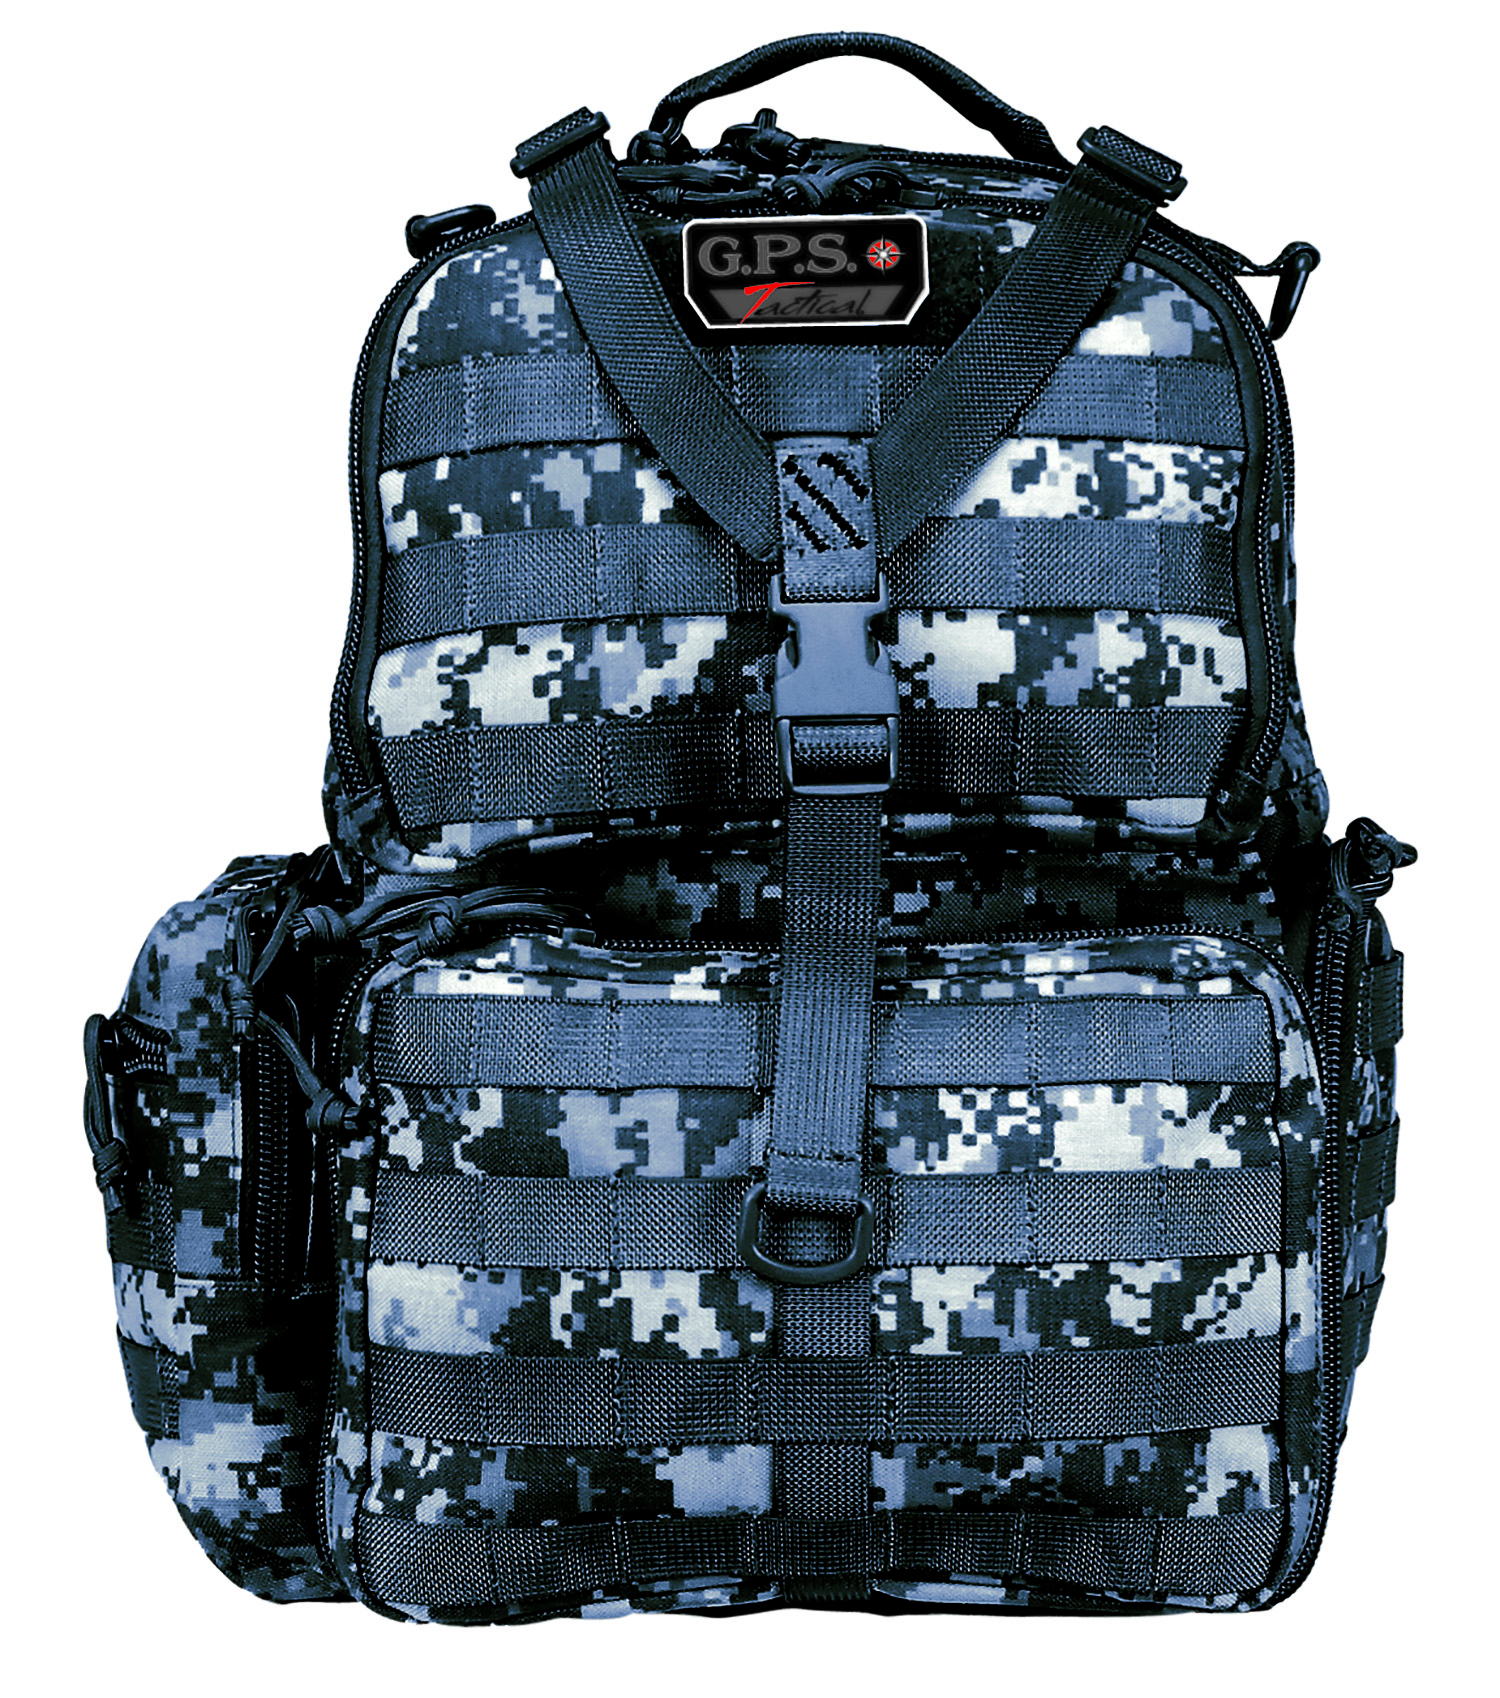 G*Outdoors GPS-T1612BPG Tactical Range Backpack Gray Digital 1000D Polyester with Removable Pistol Storage, Visual ID Storage System & Lockable Zippers Holds 3 Handguns, Ammo & Accessories